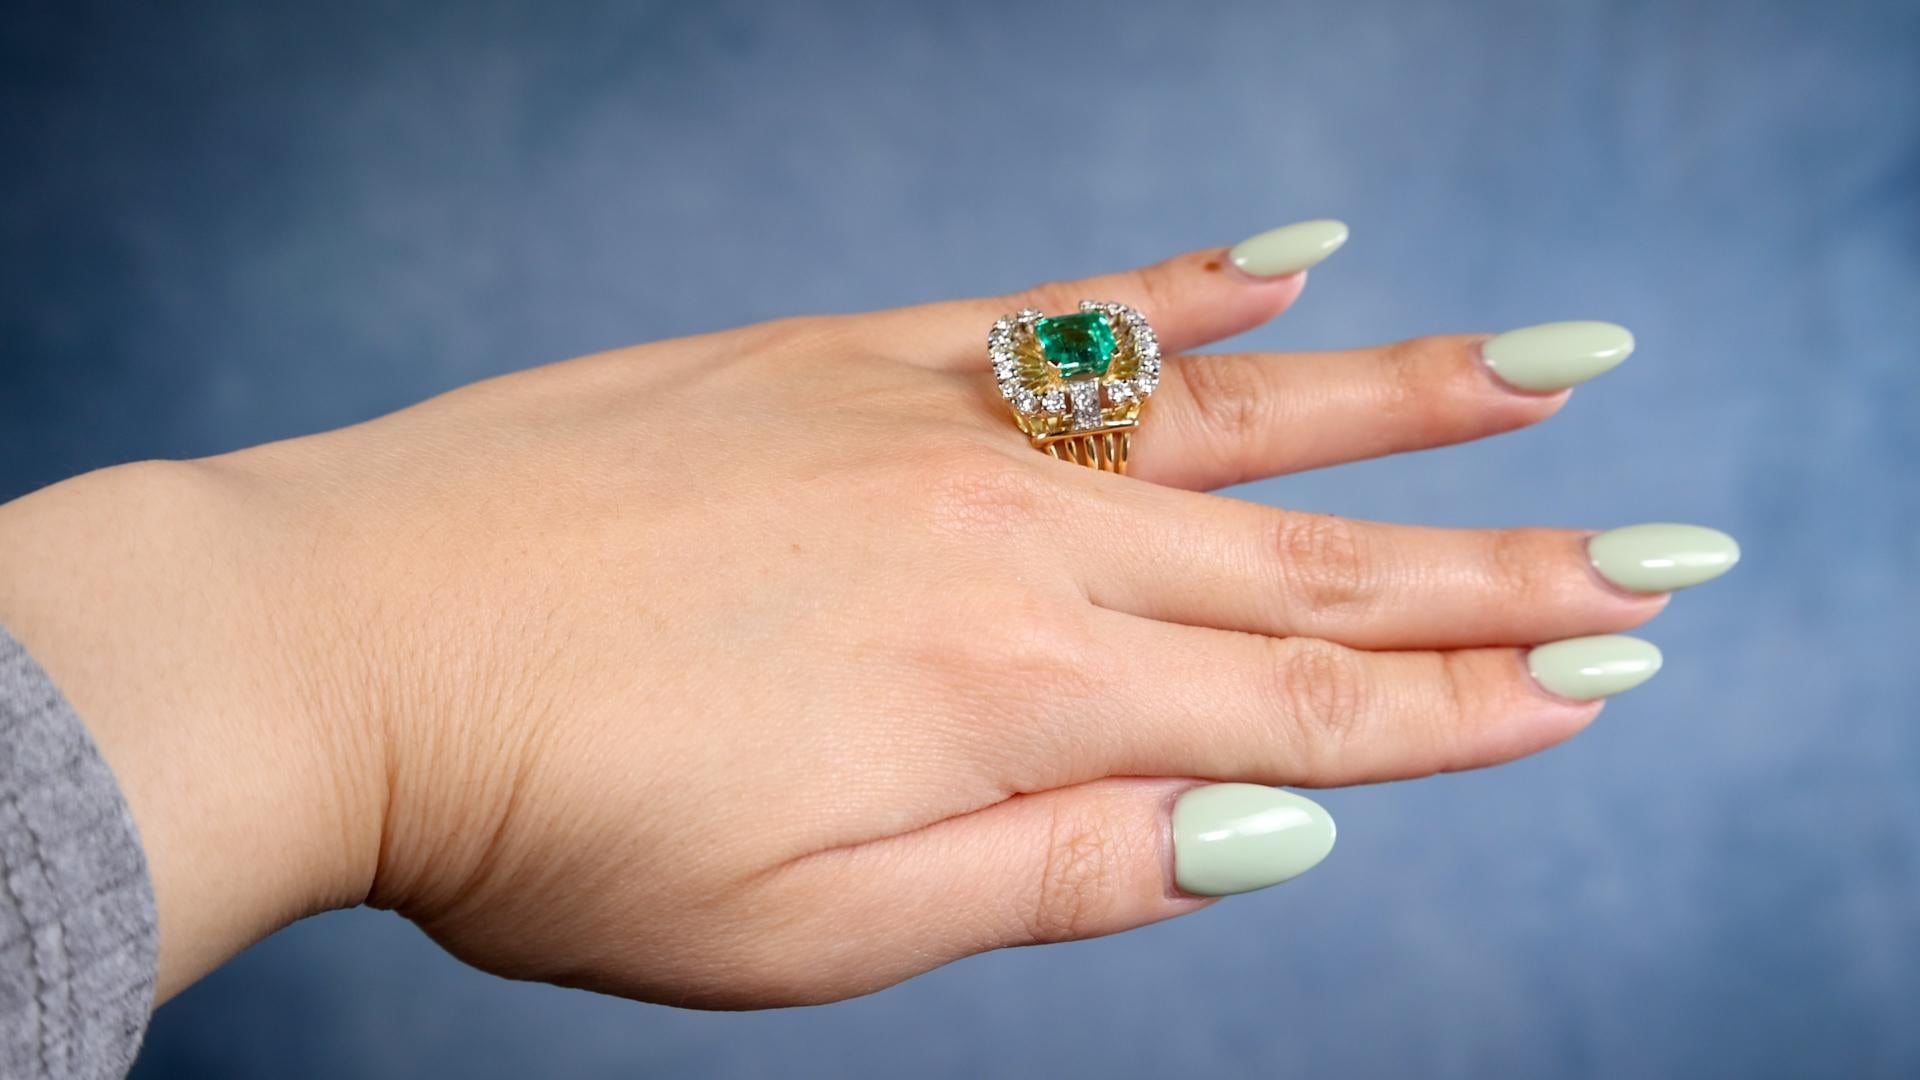 Brilliant Cut Retro French GIA 2.68 Carat Colombian Emerald Diamond 18k Yellow Gold Ring For Sale